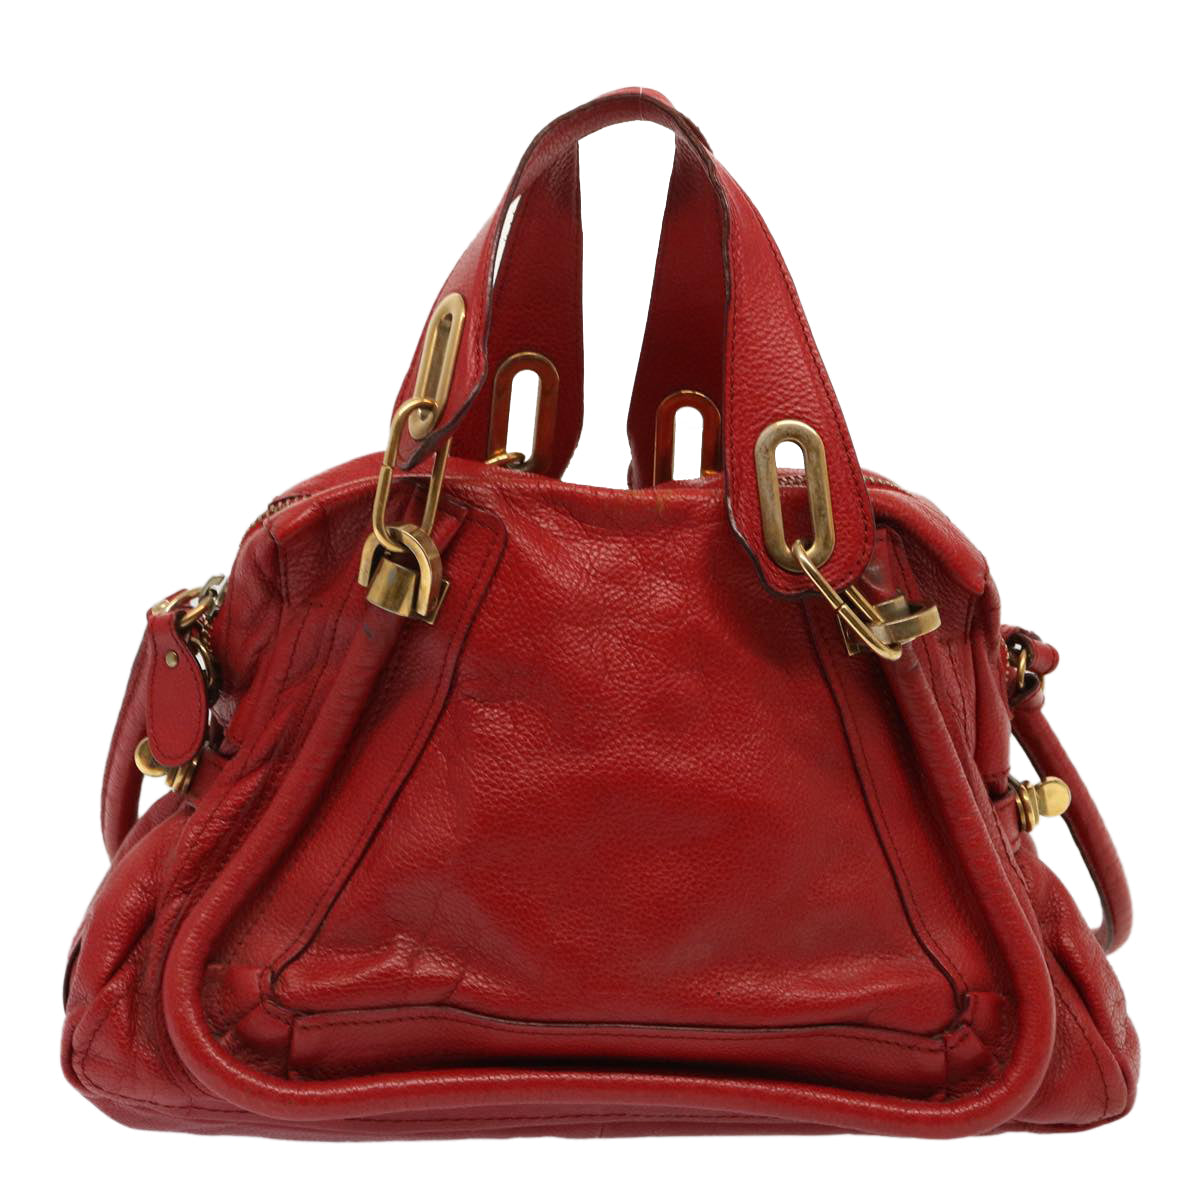 Chloe Paraty Hand Bag Leather 2way Red Auth 72667 - 0